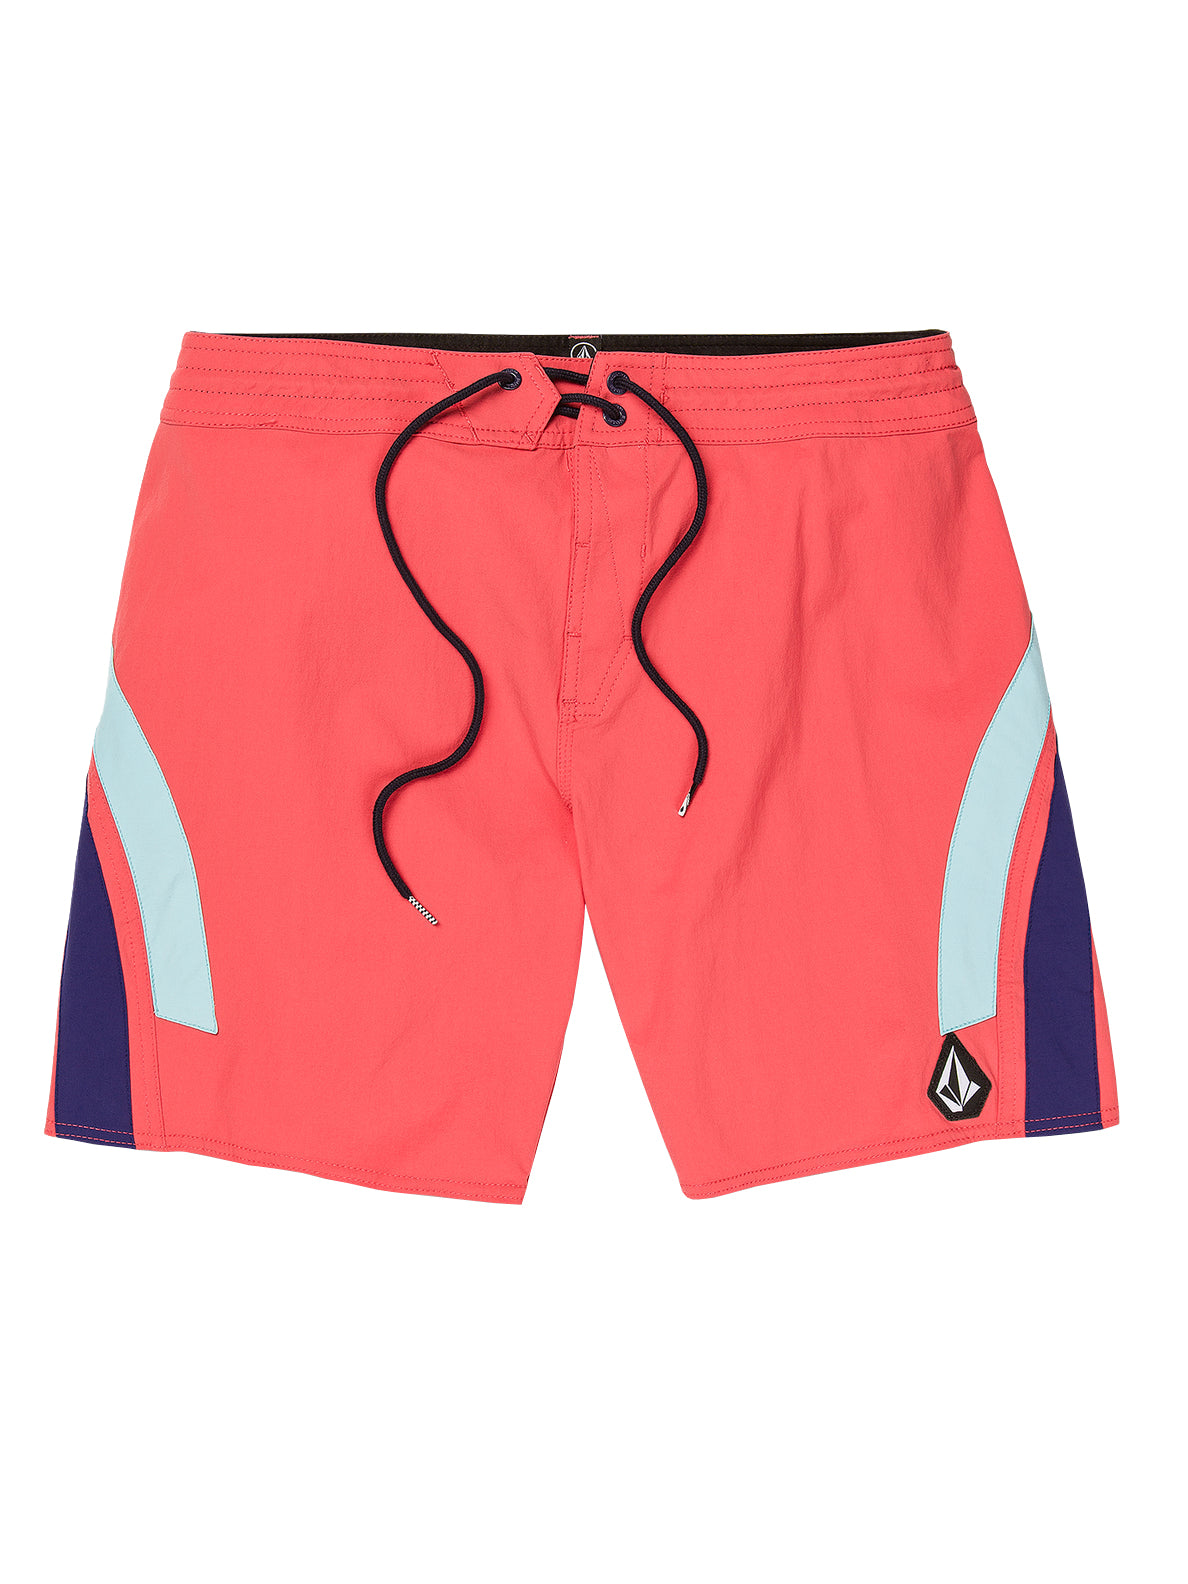 Volcom Arched Liberator Trunks CAY 31